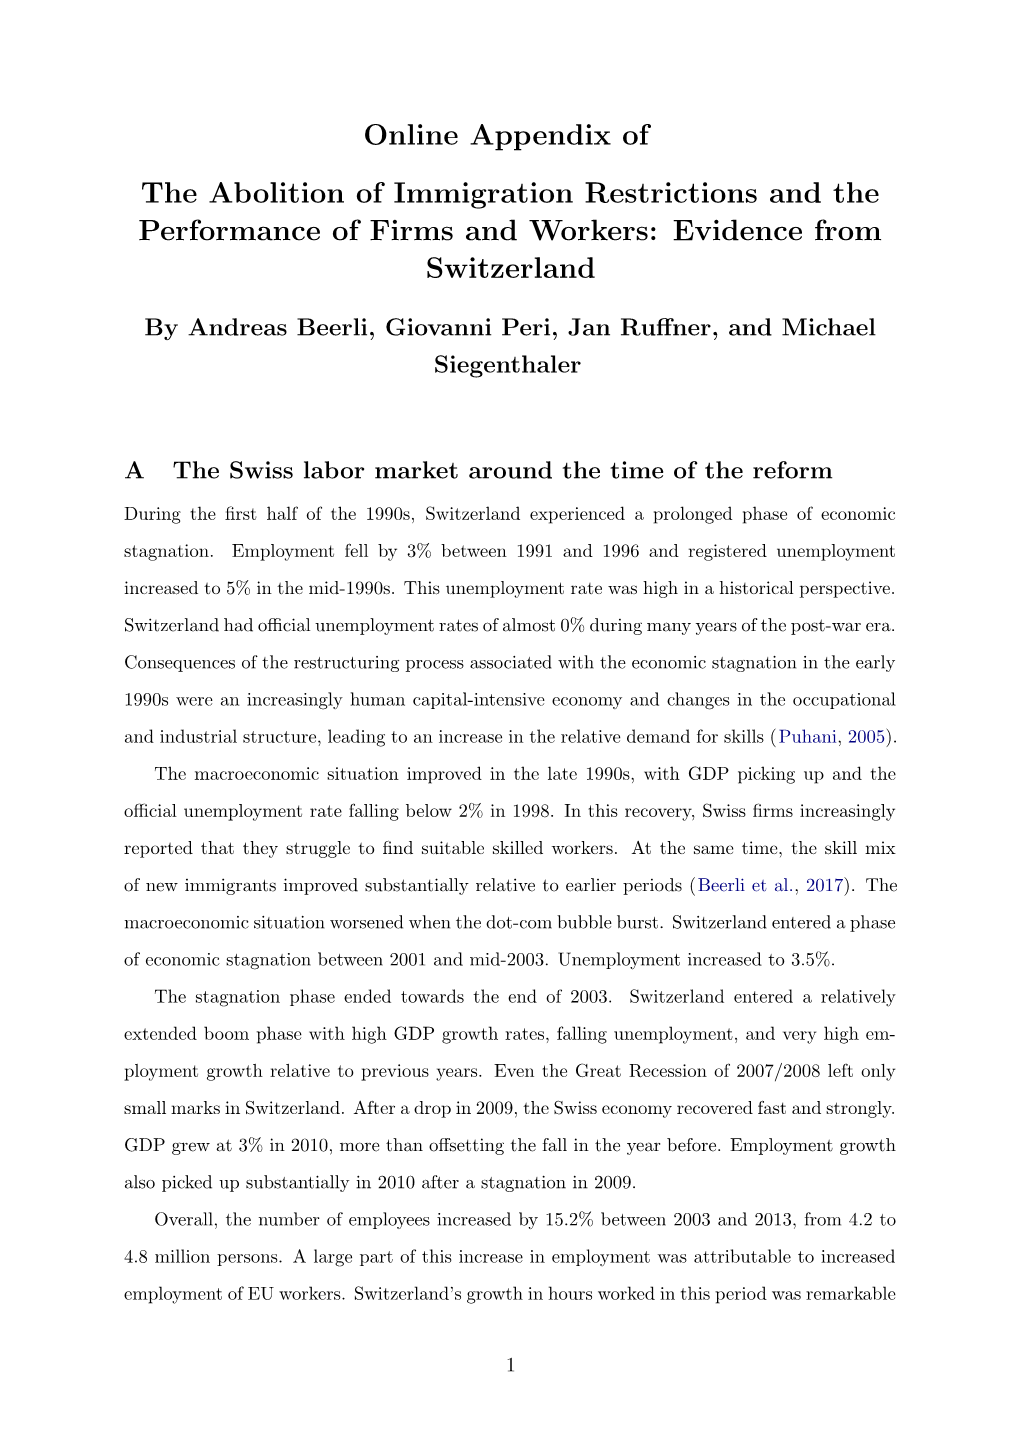 Online Appendix of the Abolition of Immigration Restrictions and the Performance of Firms and Workers: Evidence from Switzerland